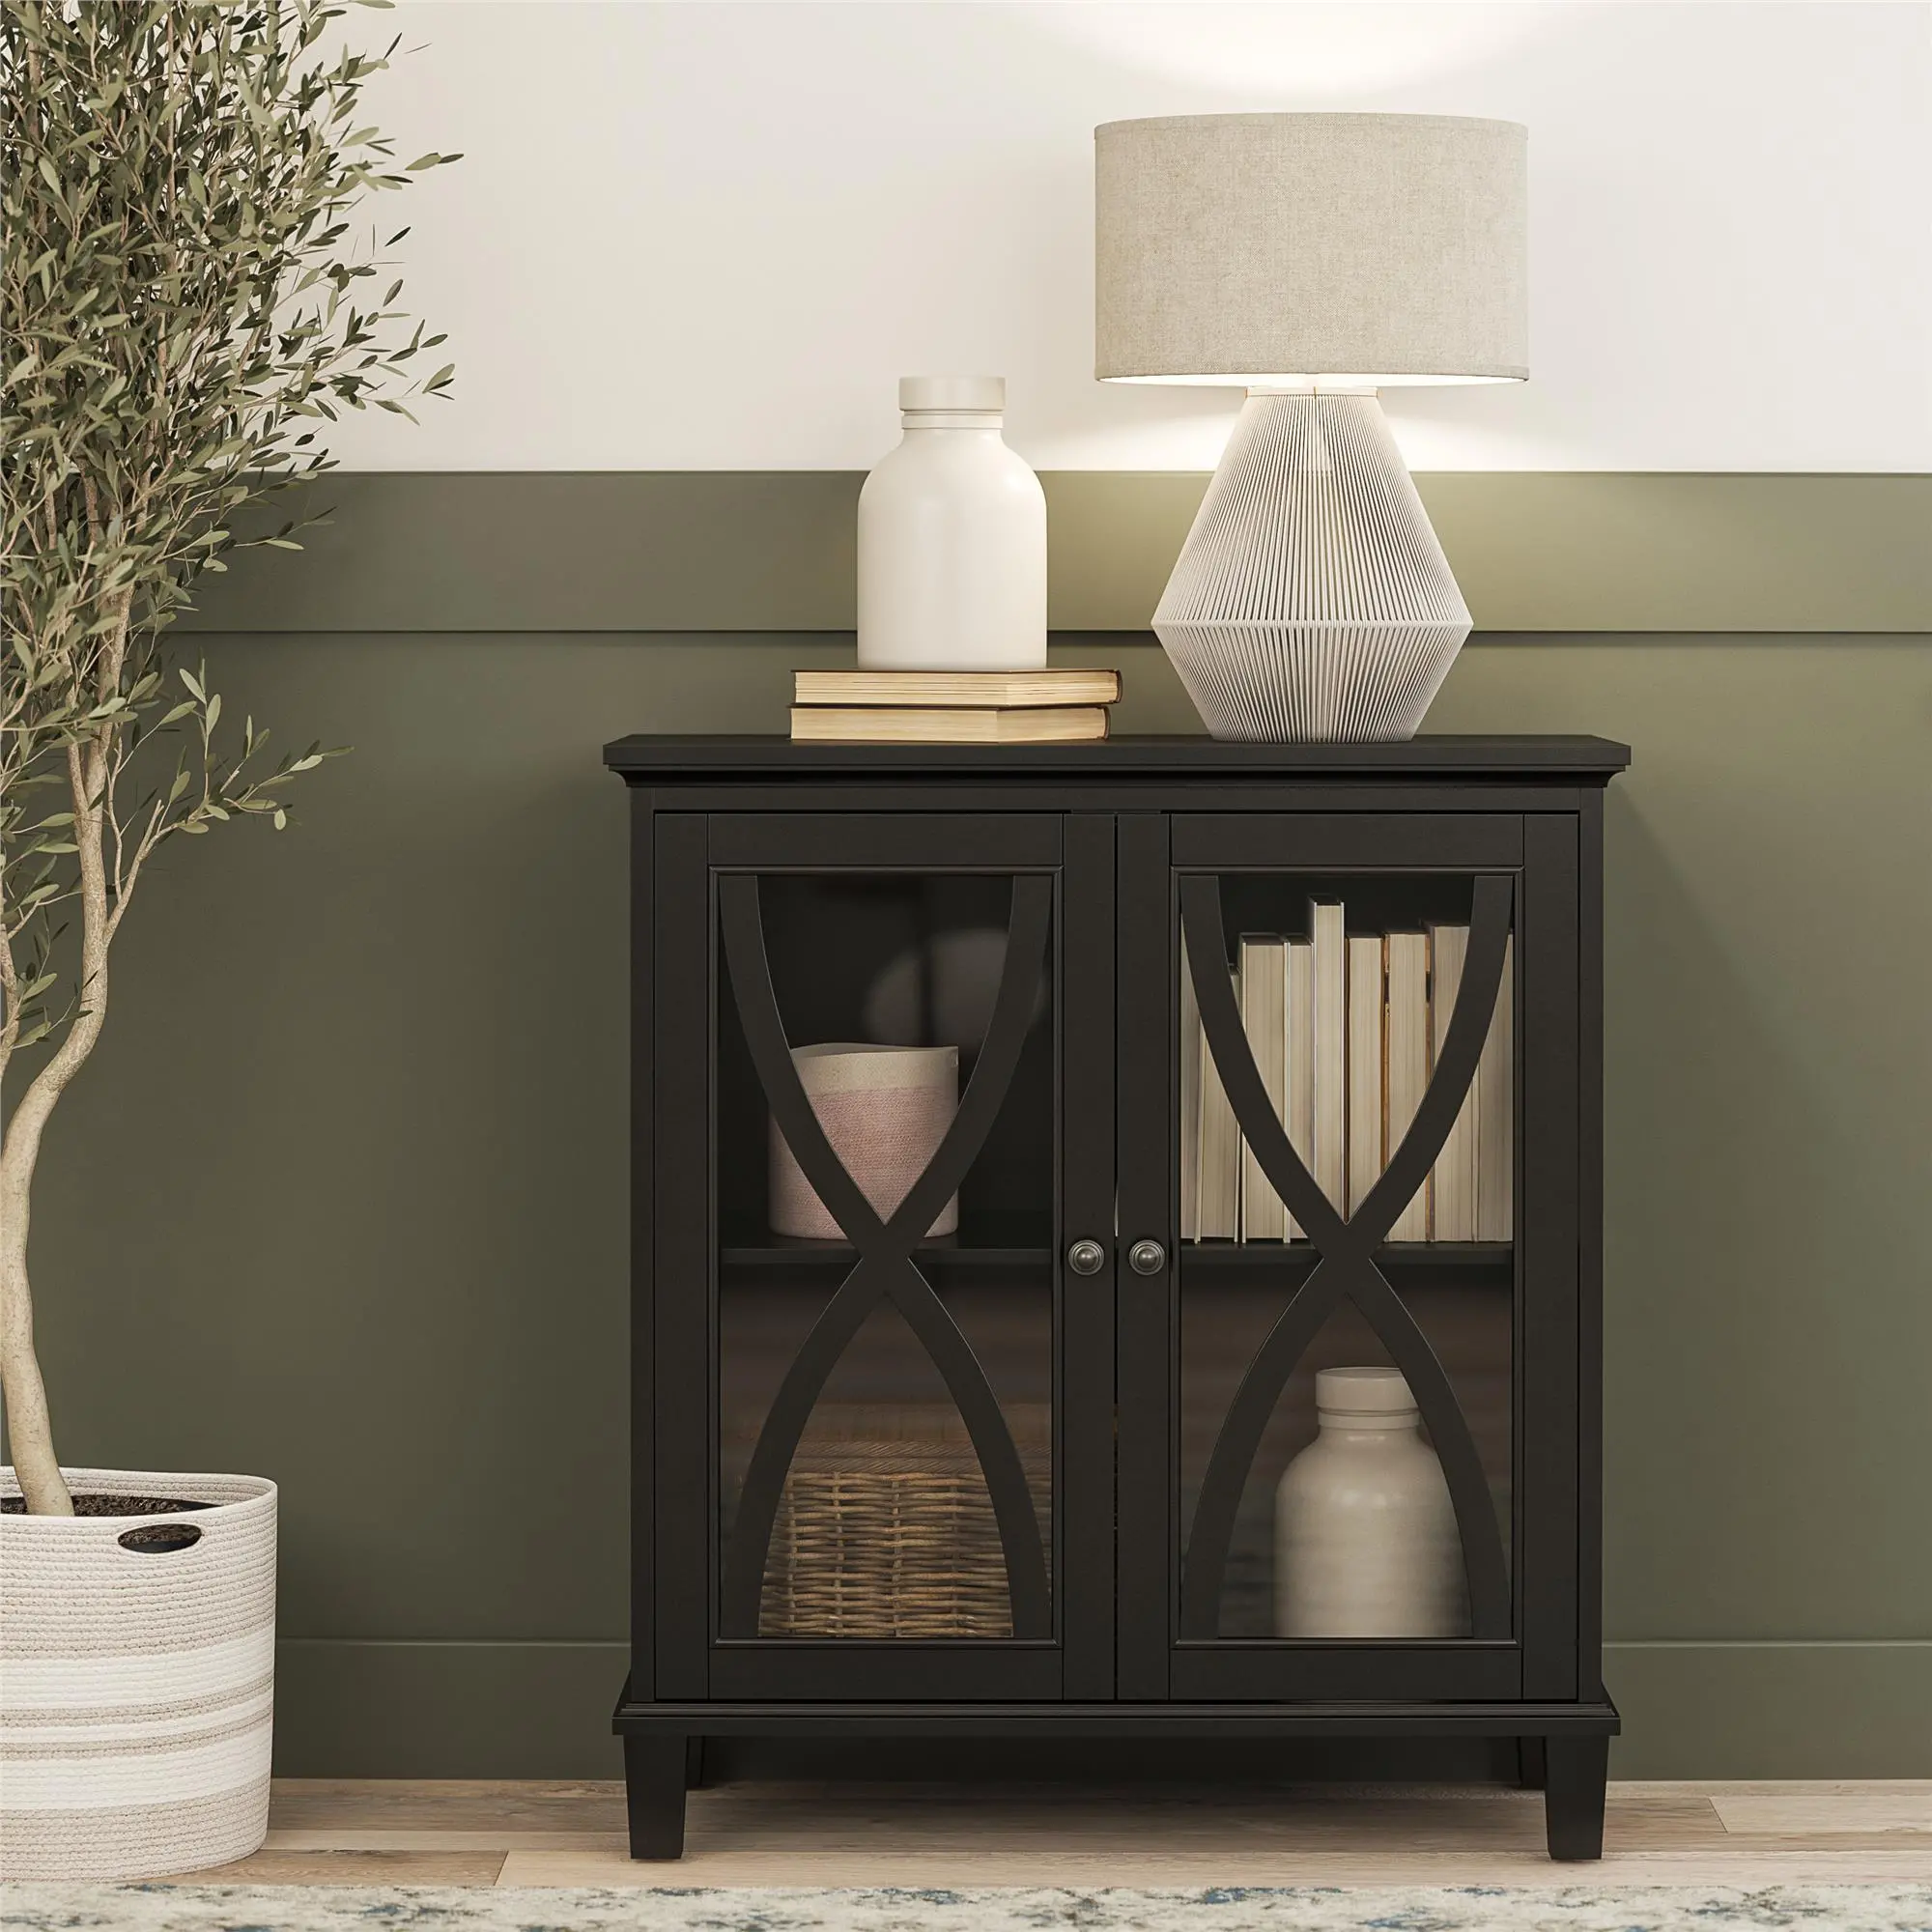 Photos - Dresser / Chests of Drawers Dorel Home Celeste Black Accent Cabinet with Glass Doors 9985872COM